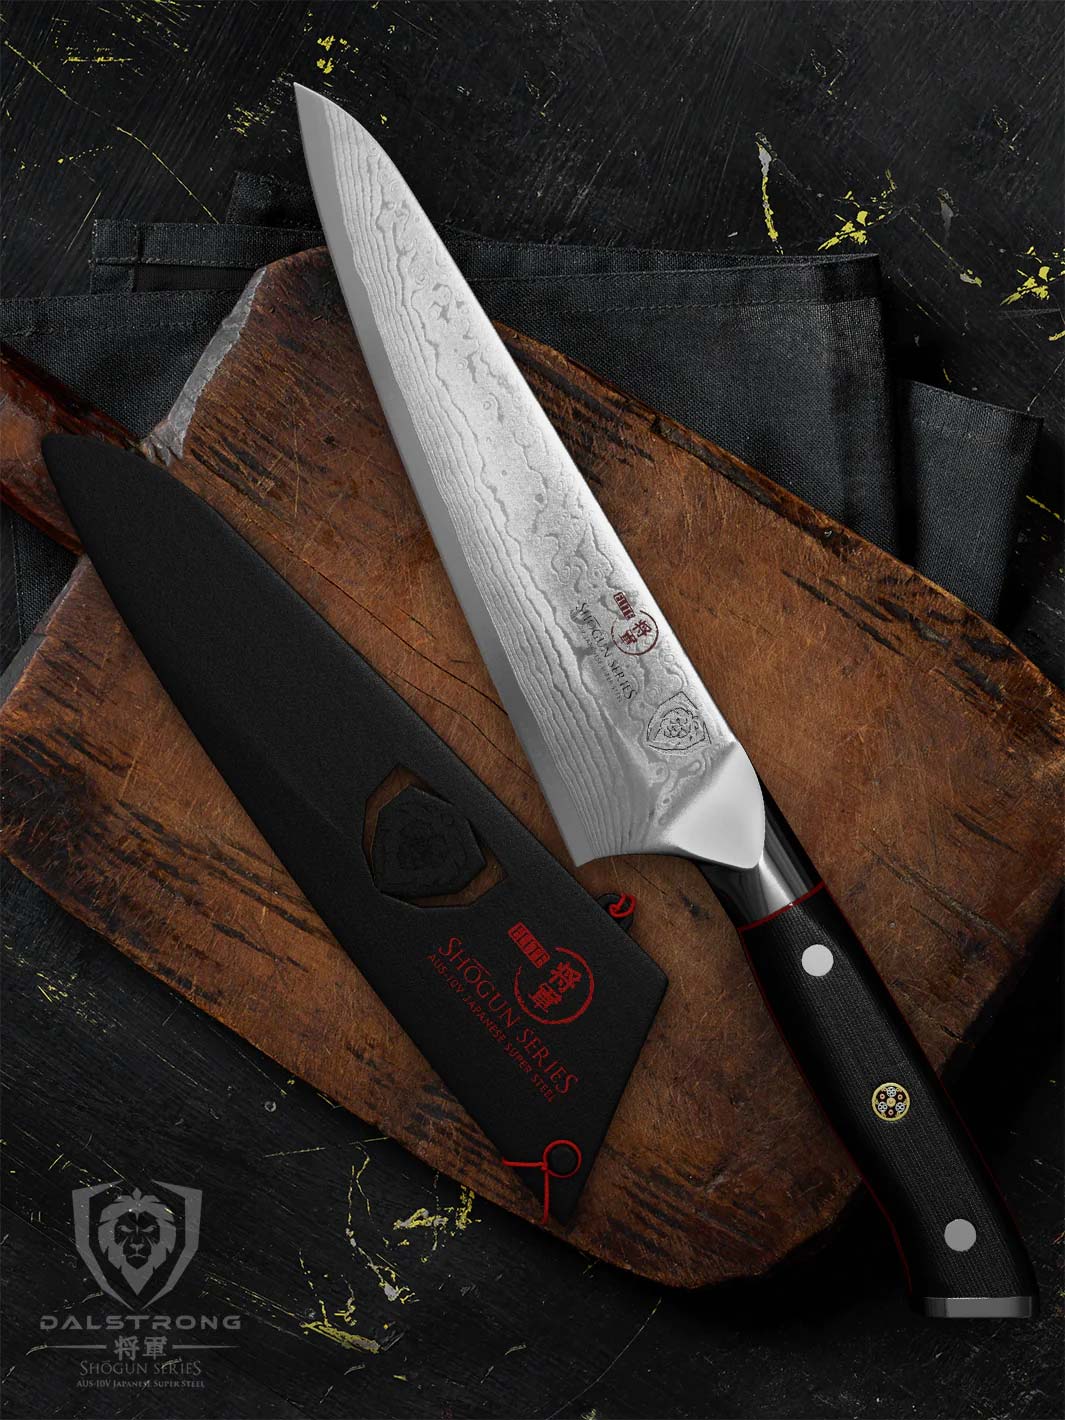 Dalstrong Chef&s Knife - Shogun Series x Gyuto - Japanese AUS-10V - Vacuum Treated - Hammered Finish - 8 inch - w/ Guard